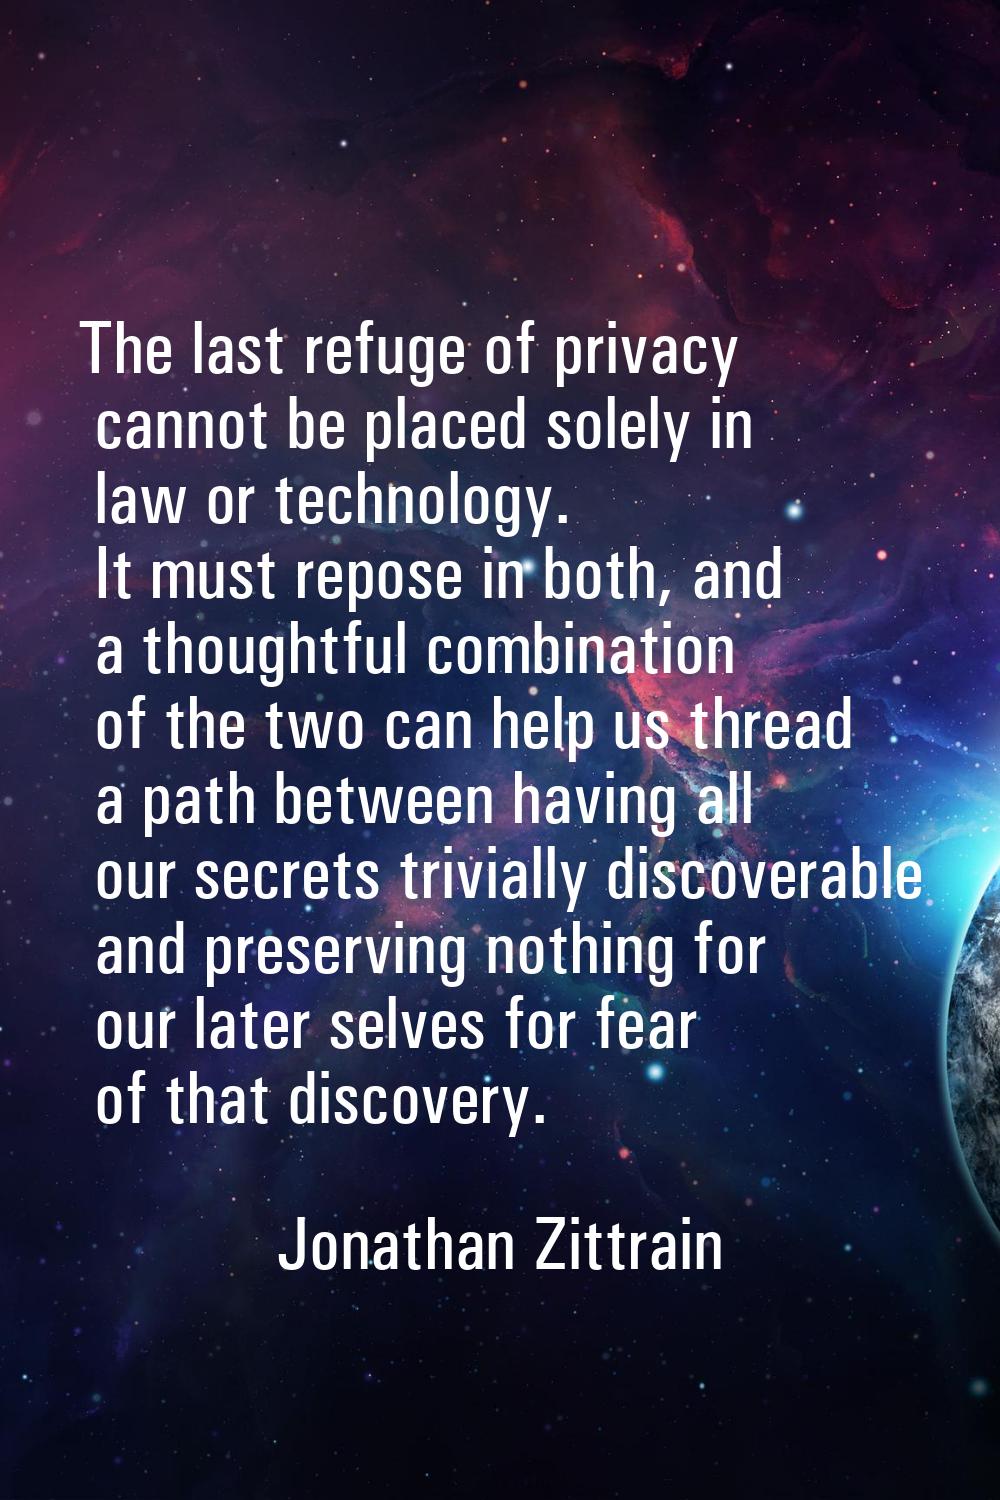 The last refuge of privacy cannot be placed solely in law or technology. It must repose in both, an